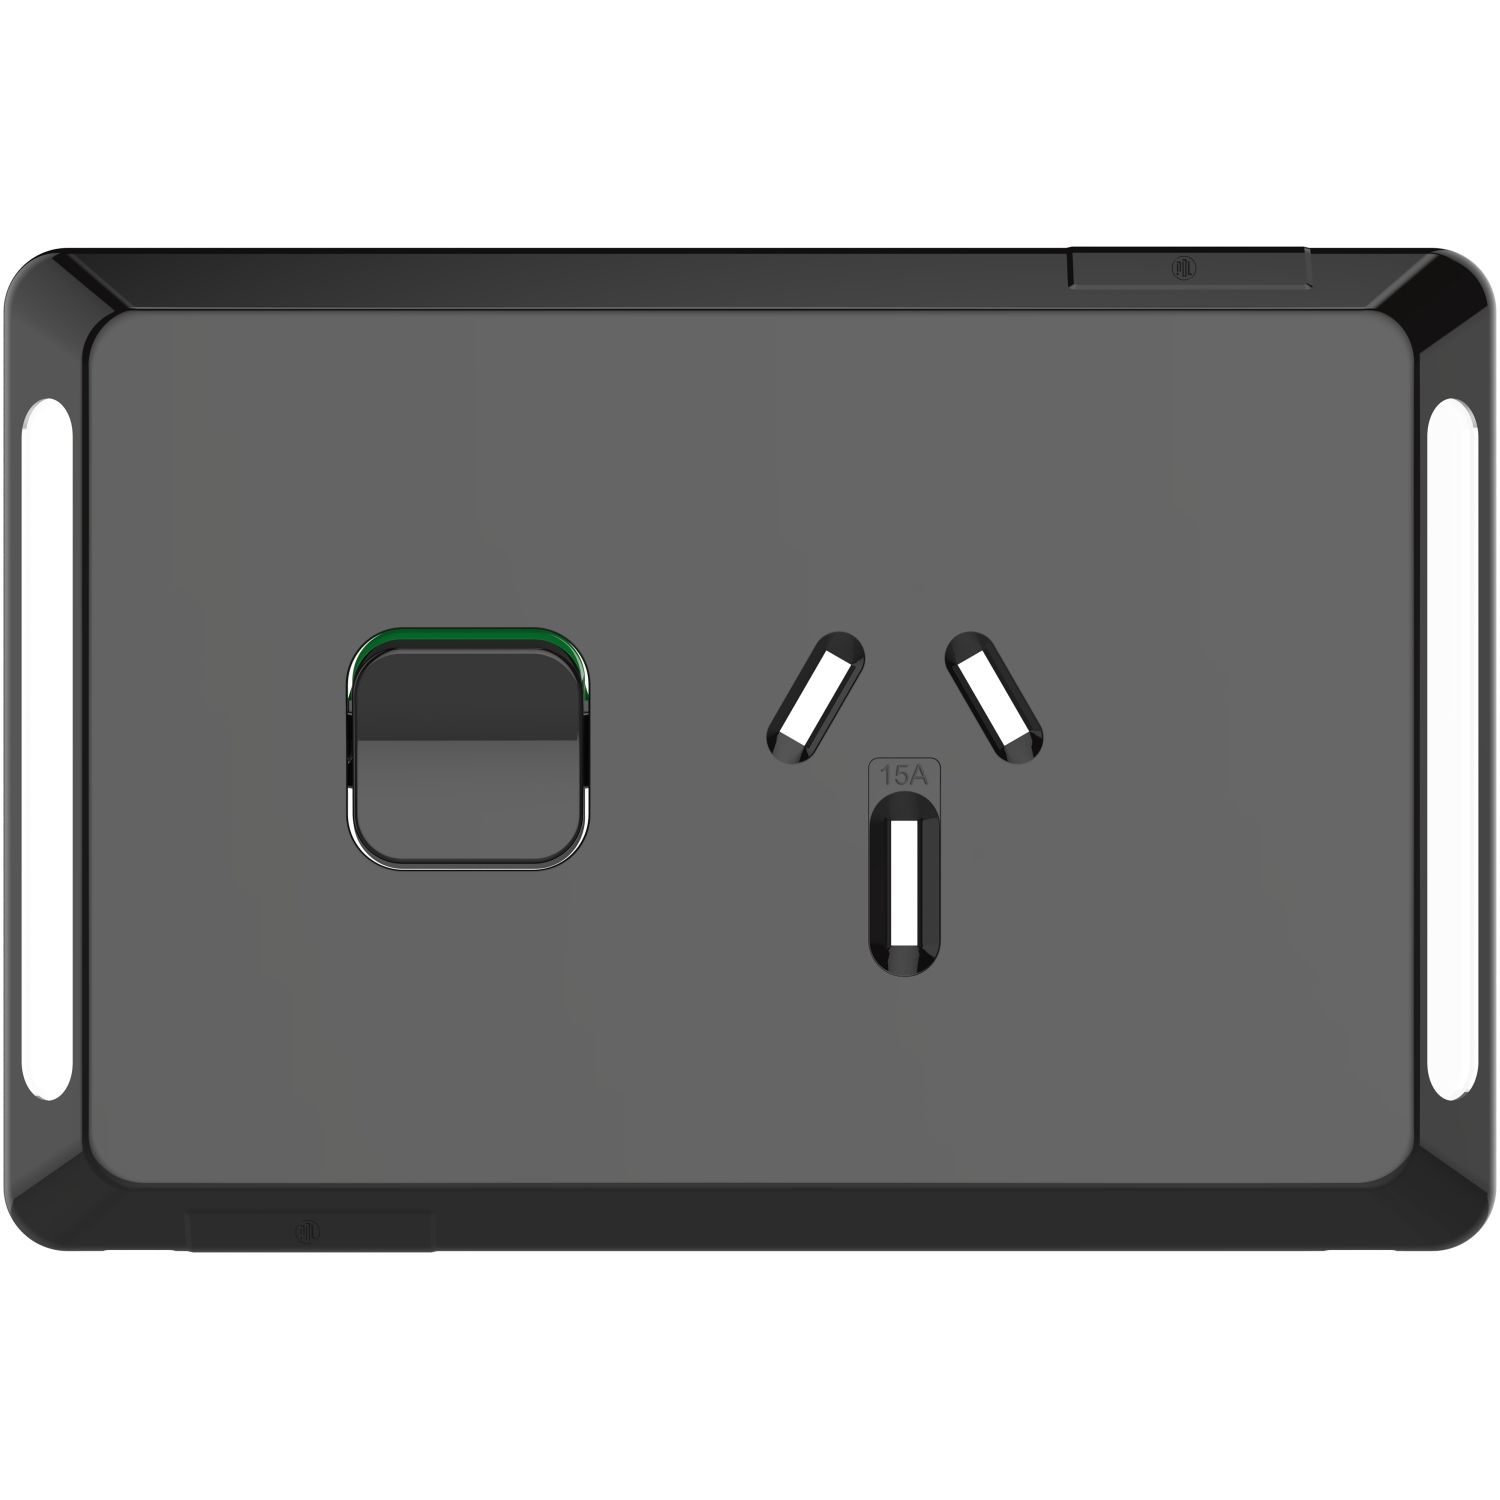 PDL Pro Series - Cover Plate Switched Socket 15A Horizontal - Black